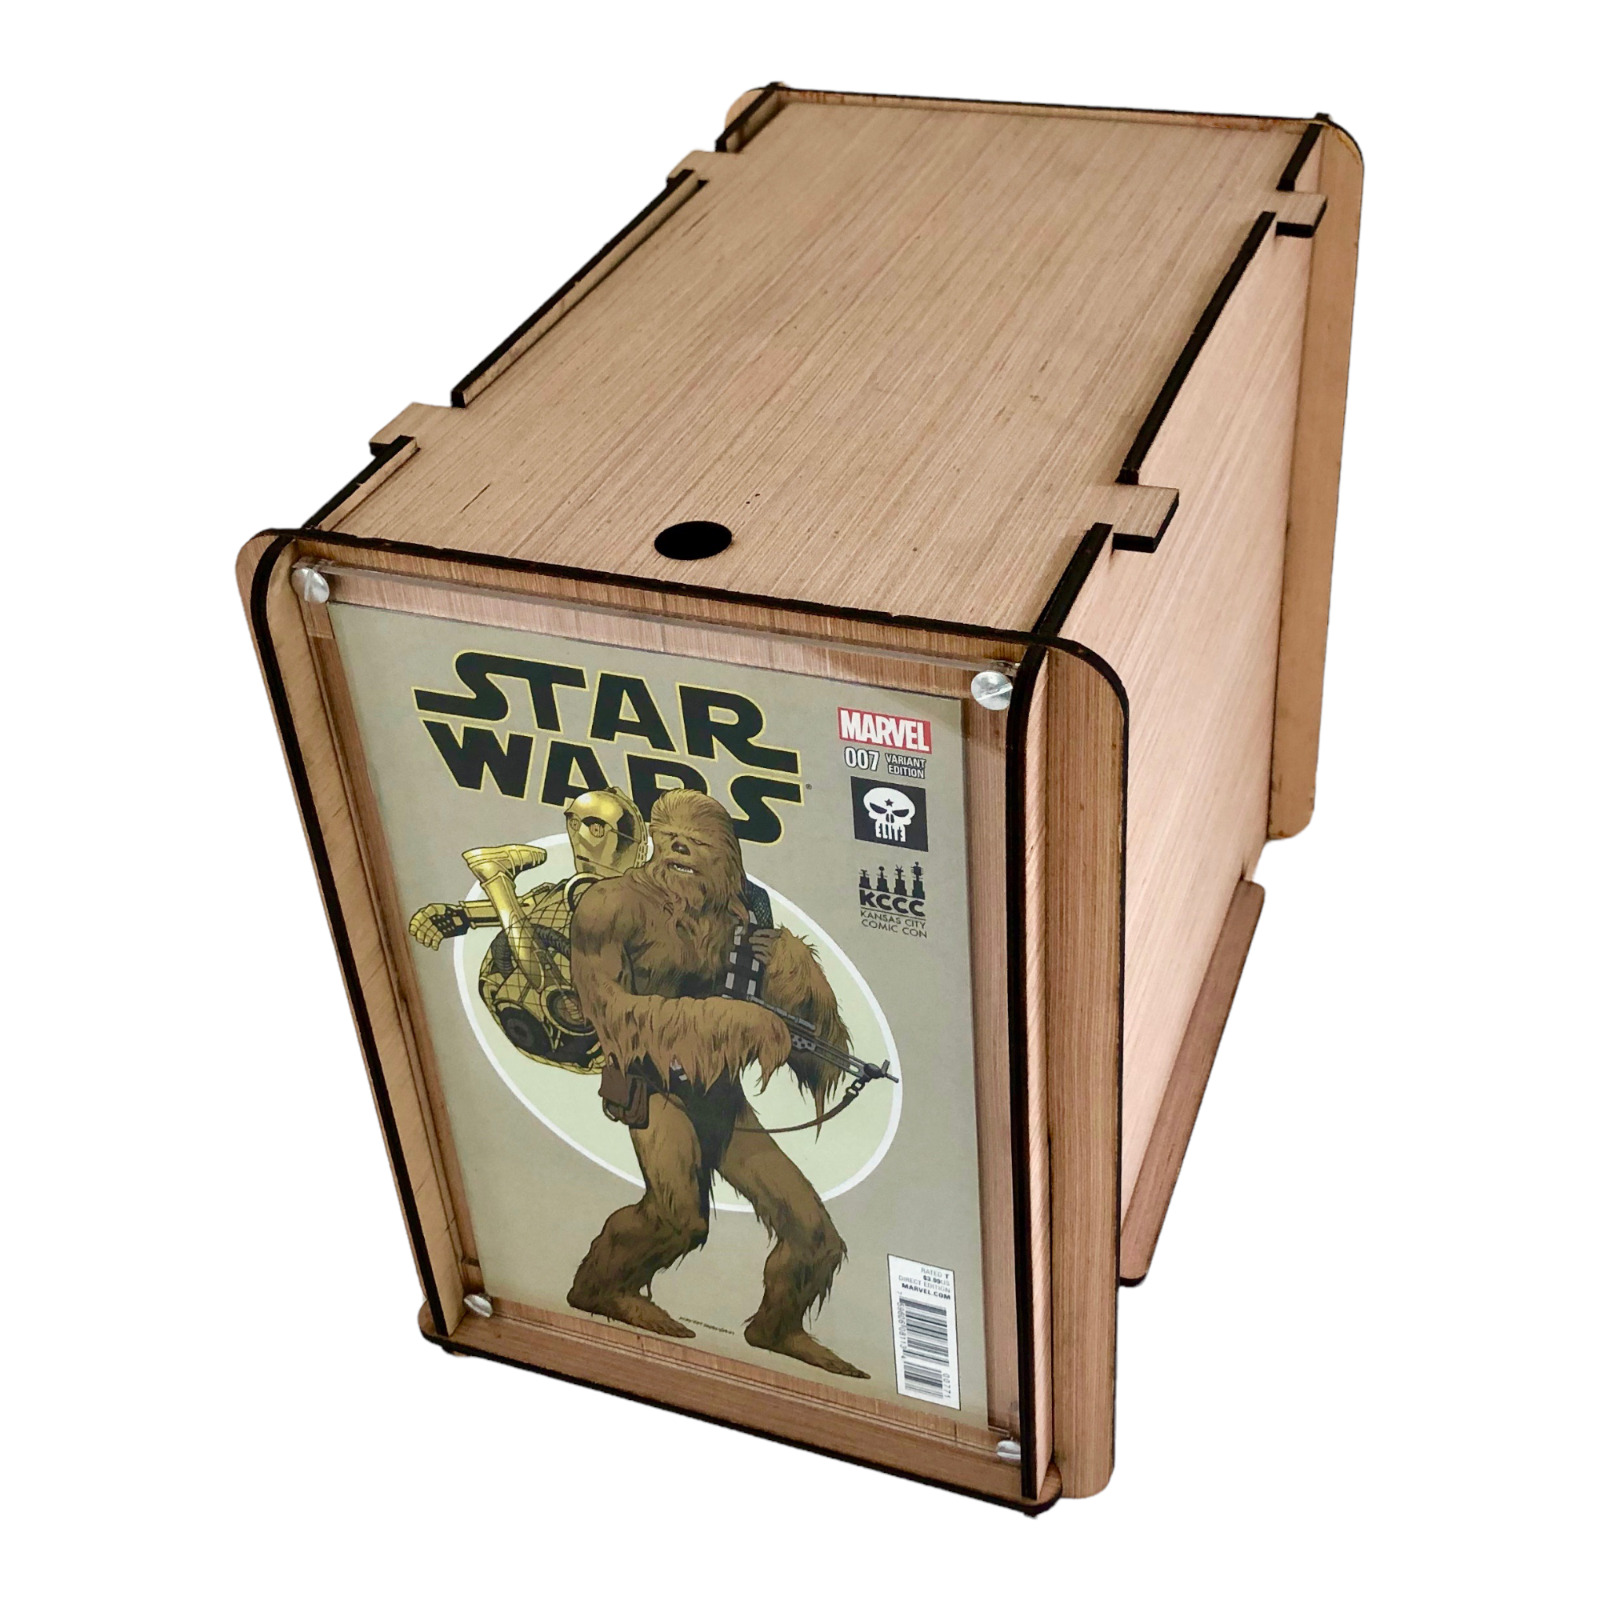 Comic Book Storage/Display Box + Marvel Star Wars #7 Comic with Variant Cover